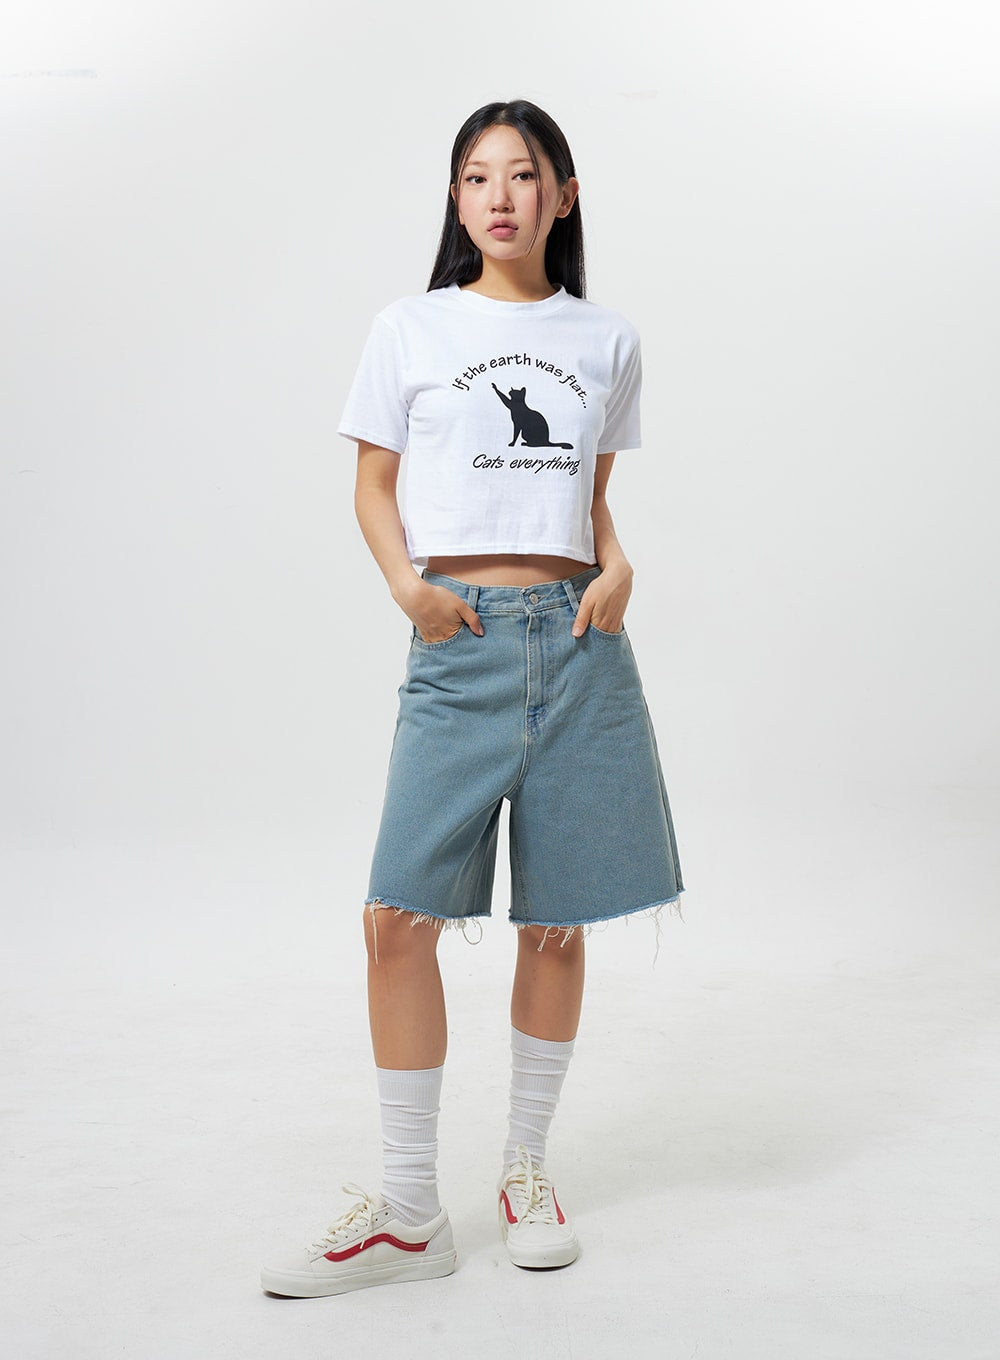 cat-cropped-tee-cy324